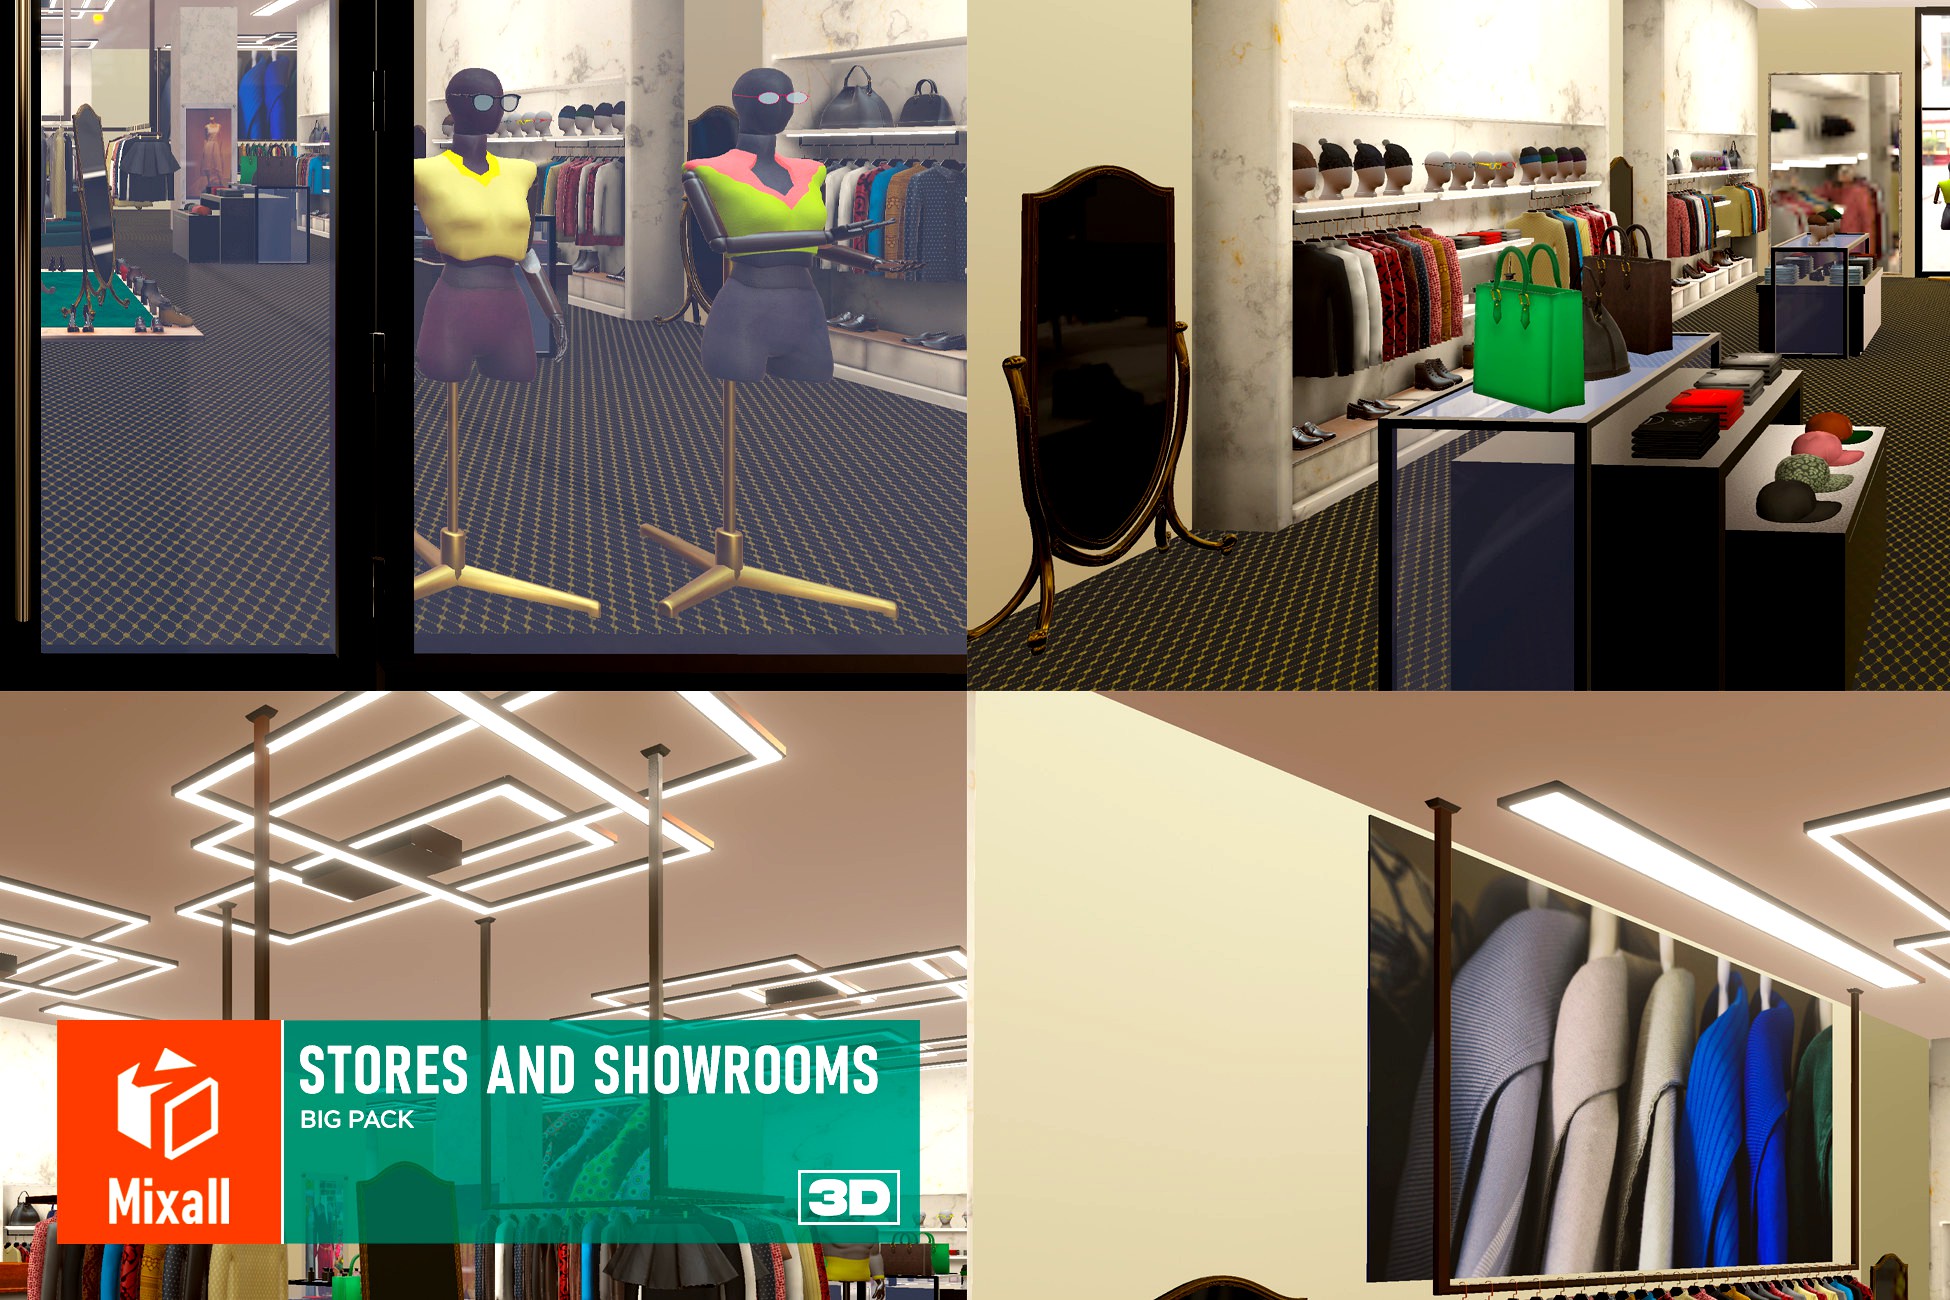 Stores and showrooms - Big Pack